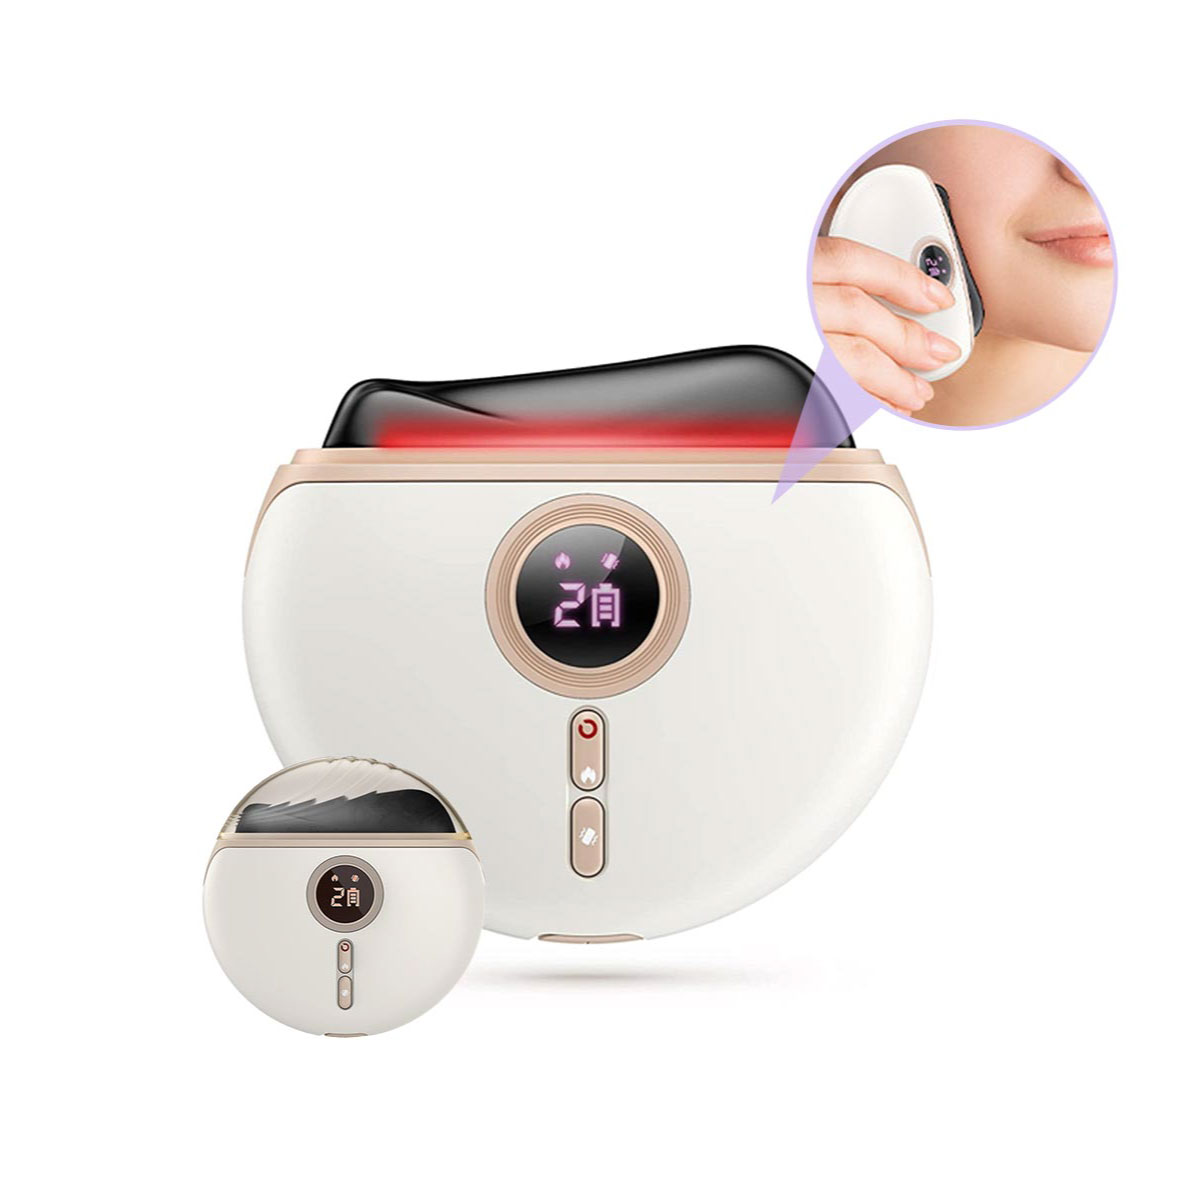 Giselle Mini Black Bian Stone Electric Thermal Scraping Massager Pushing Facial Beauty Board - HEA0072